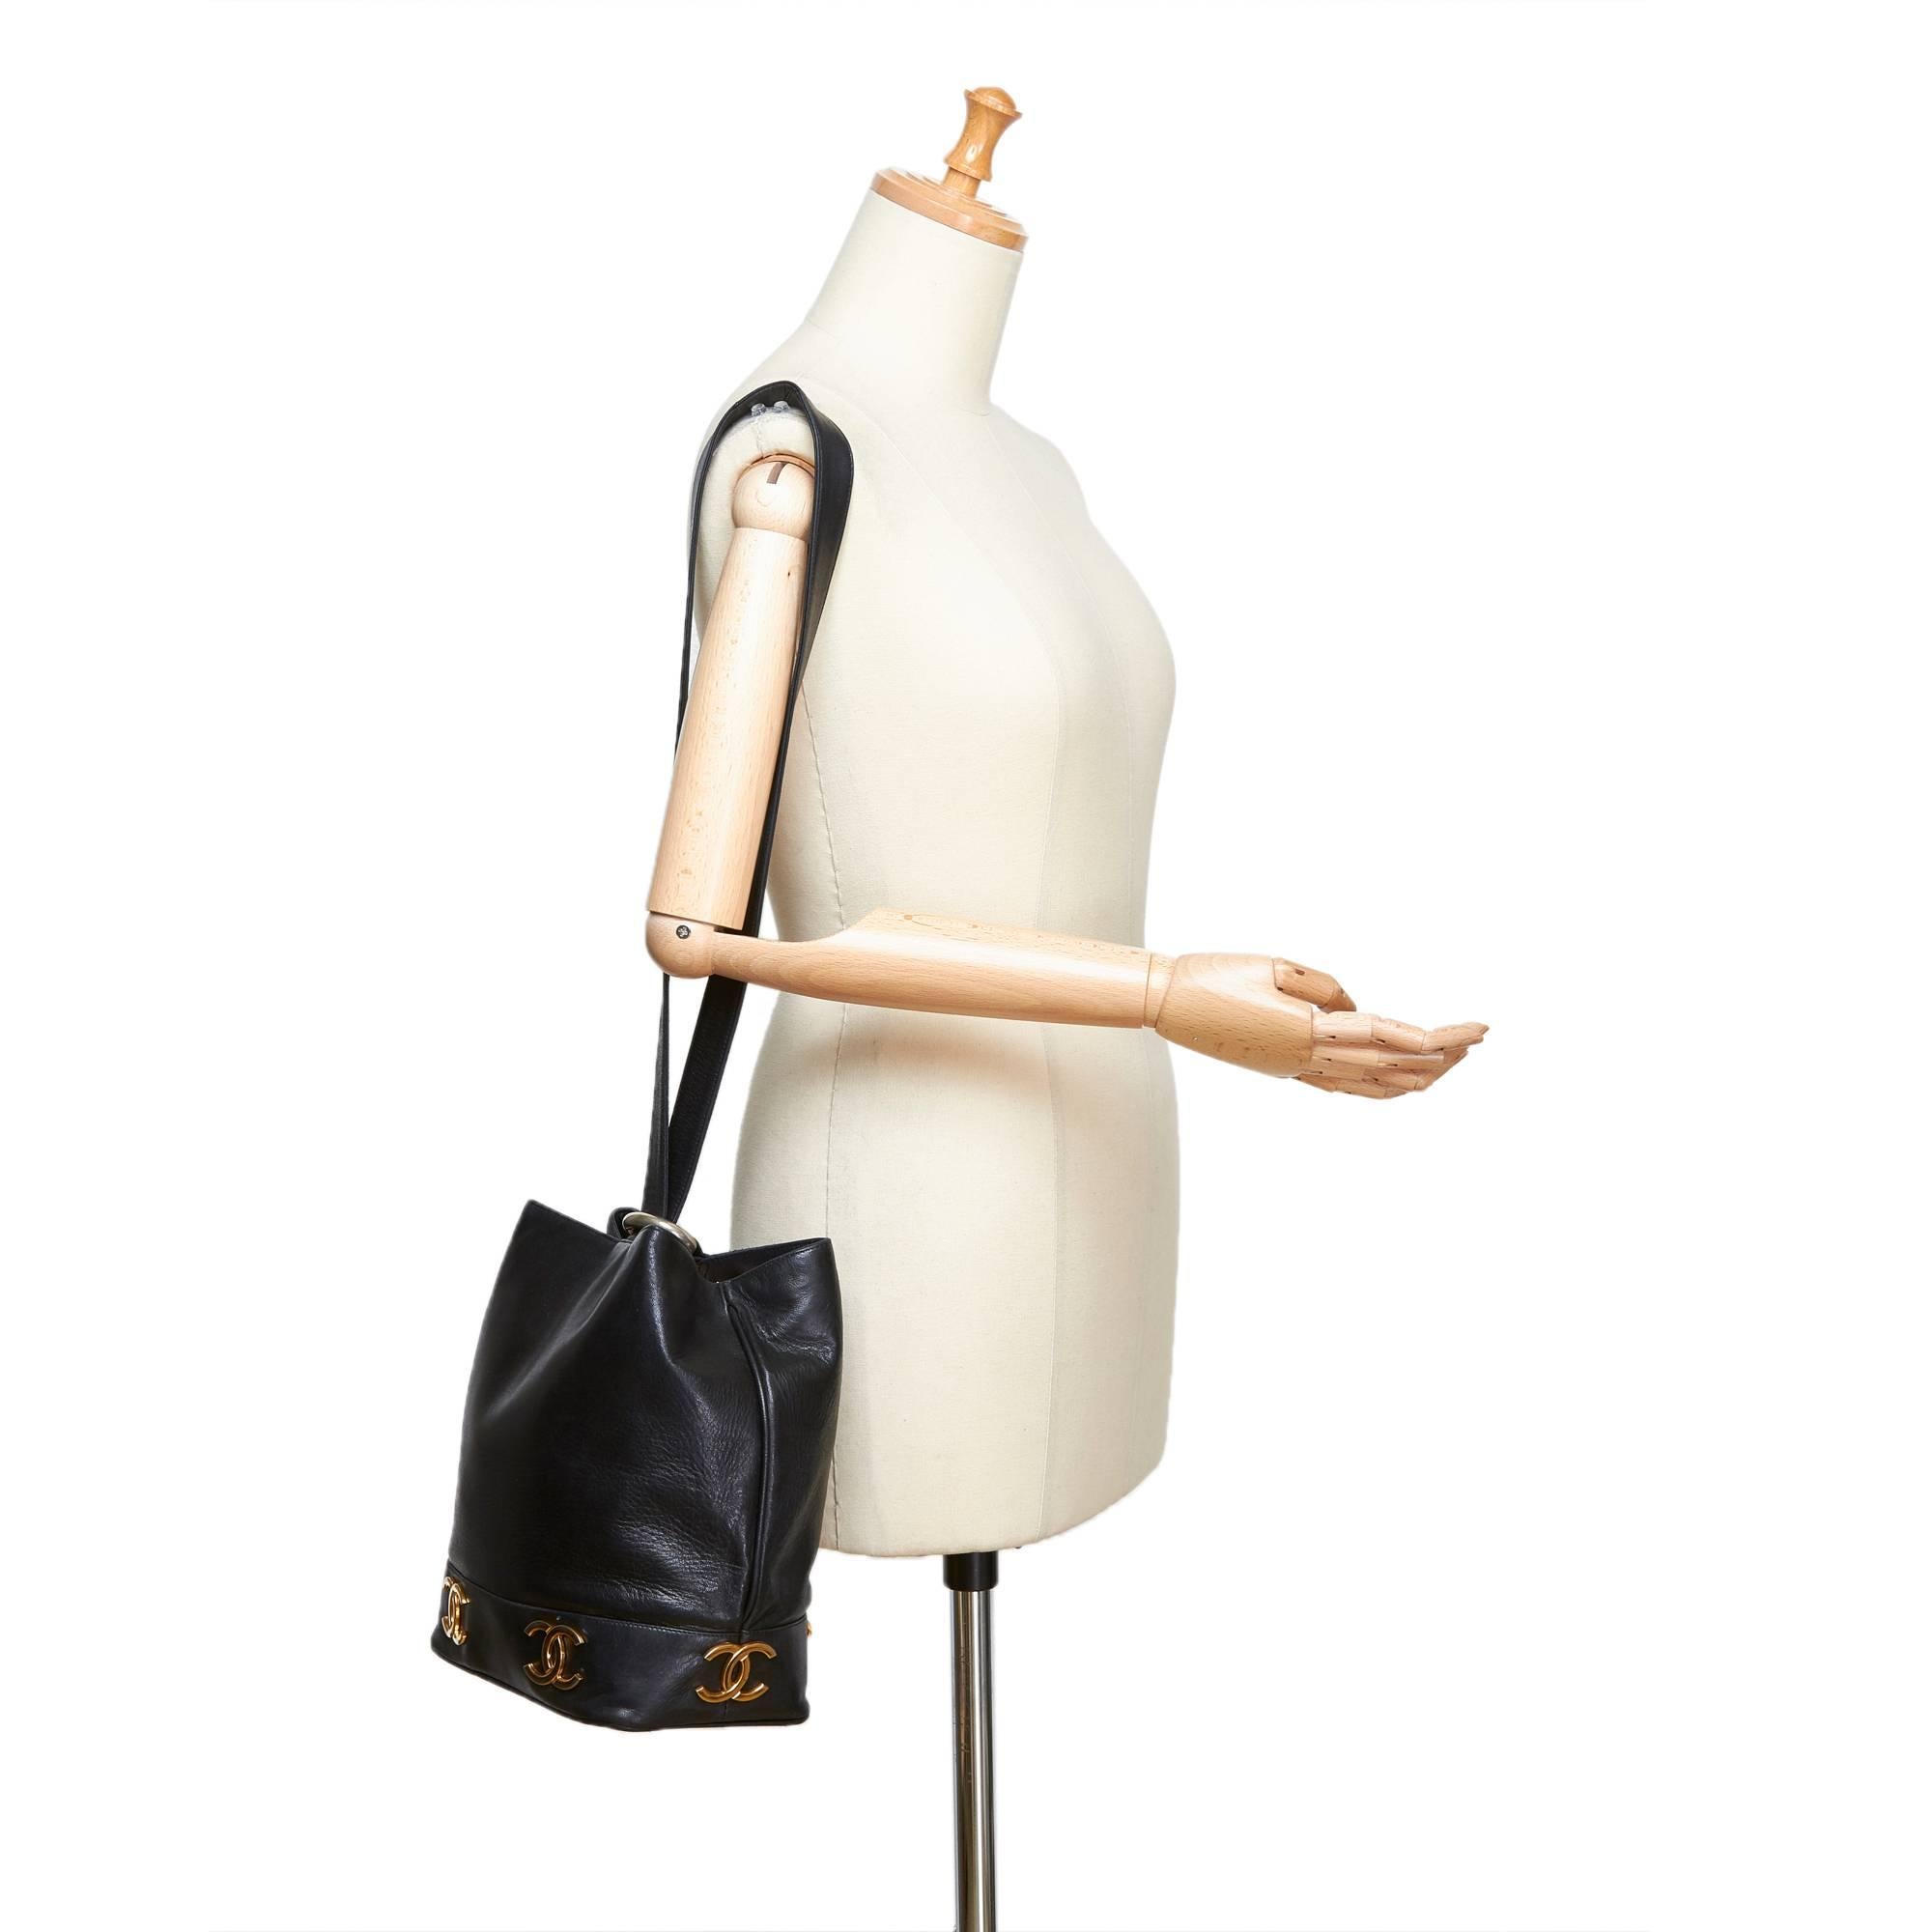 - Vintage 90s Chanel black lambskin leather bucket bag.   

- Featuring single strap with a gold-toned 